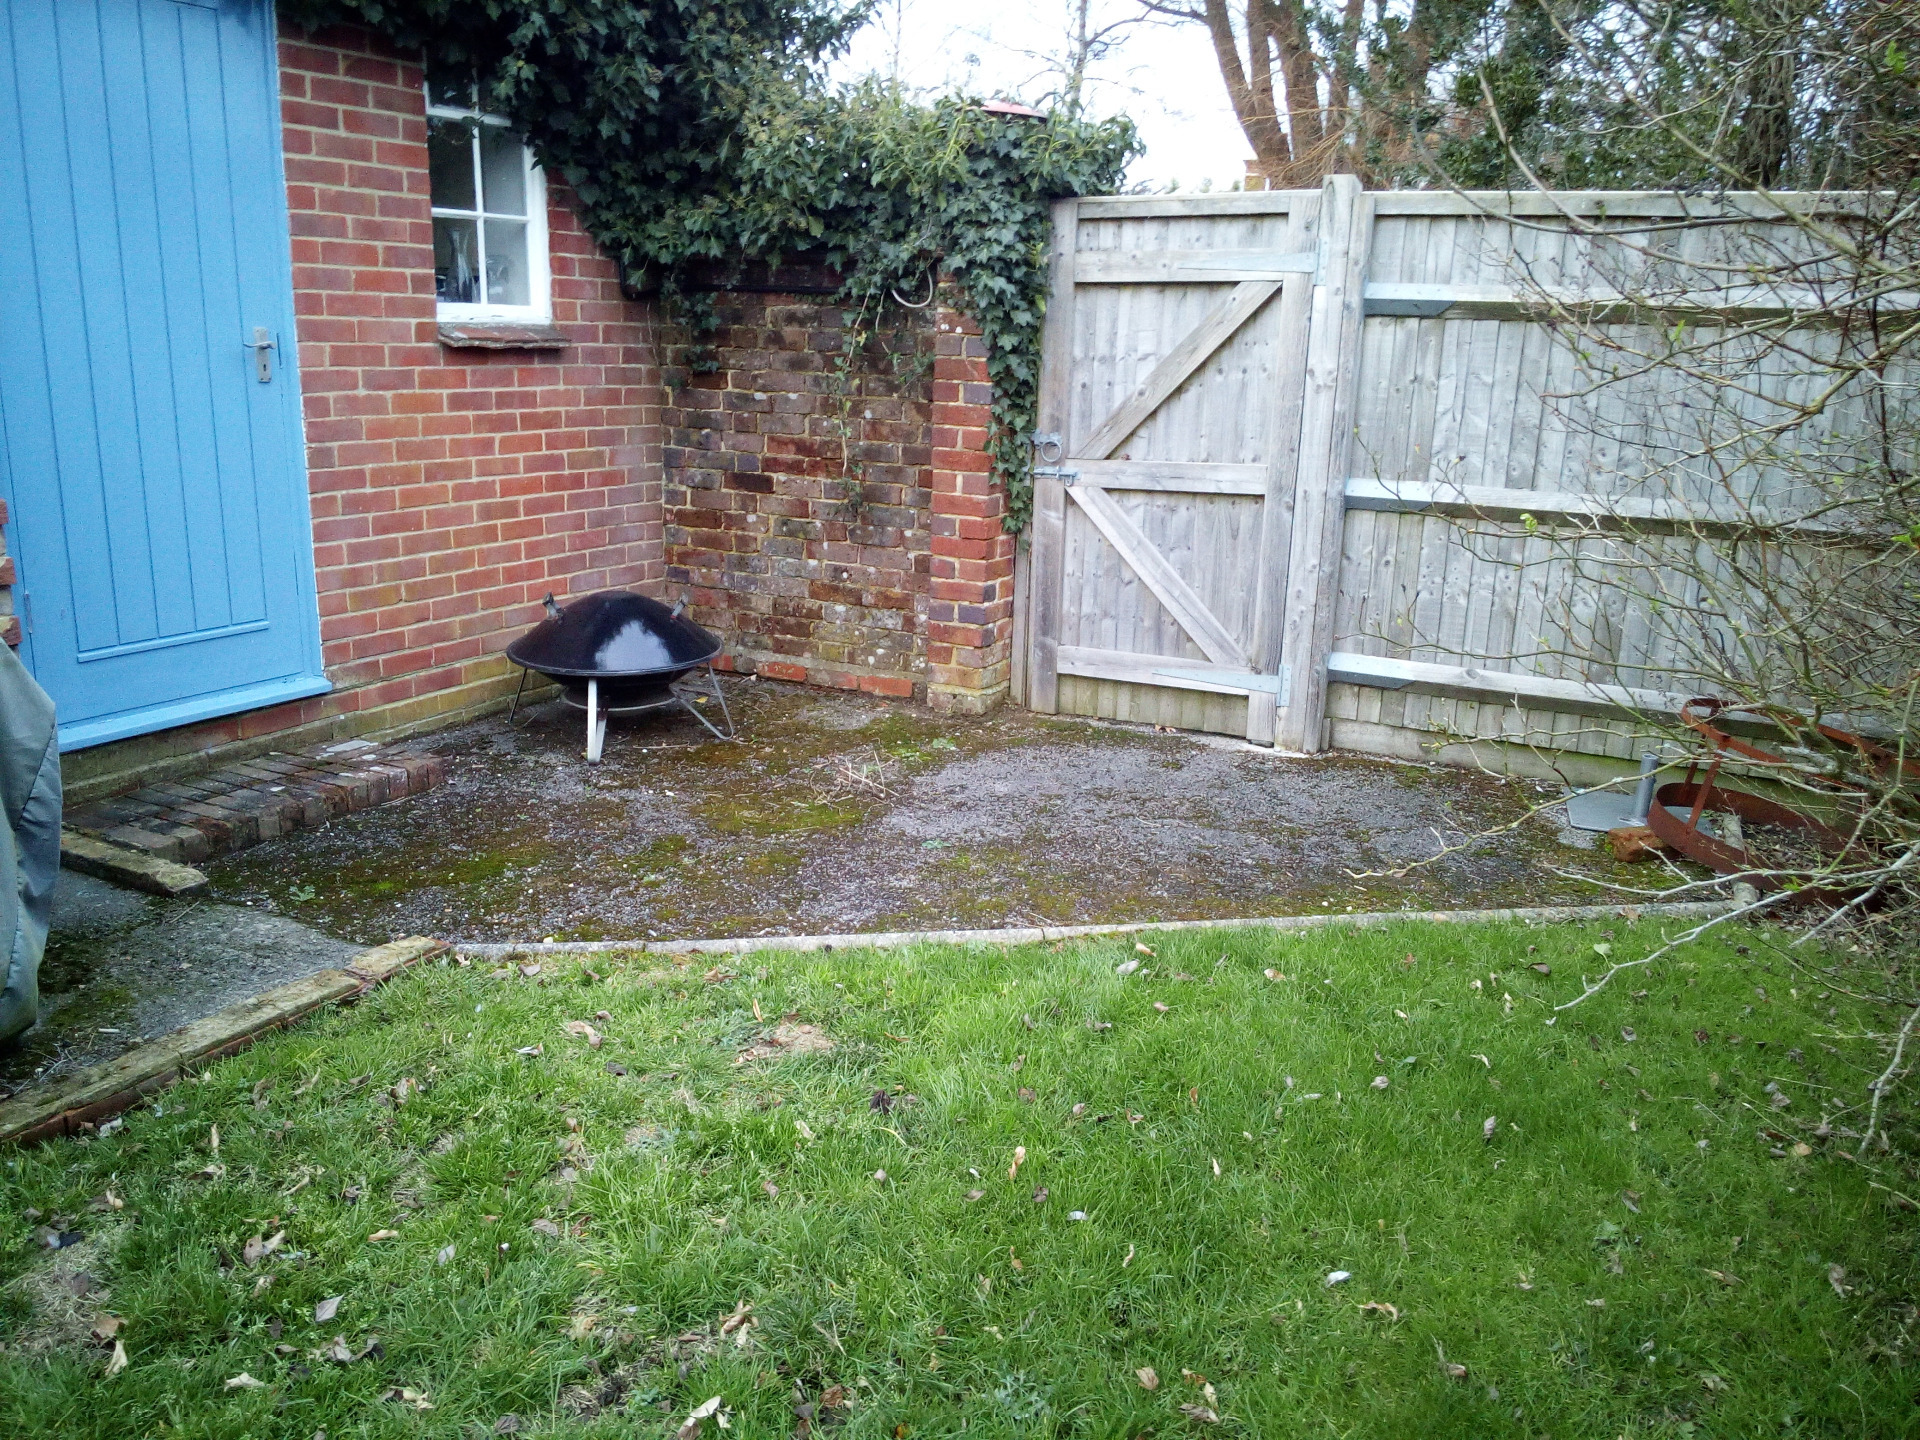 Complete garden makeover in Fareham with paving, cobbles, pergola, hot tub, planting, hedging, sleepers, shed, turf